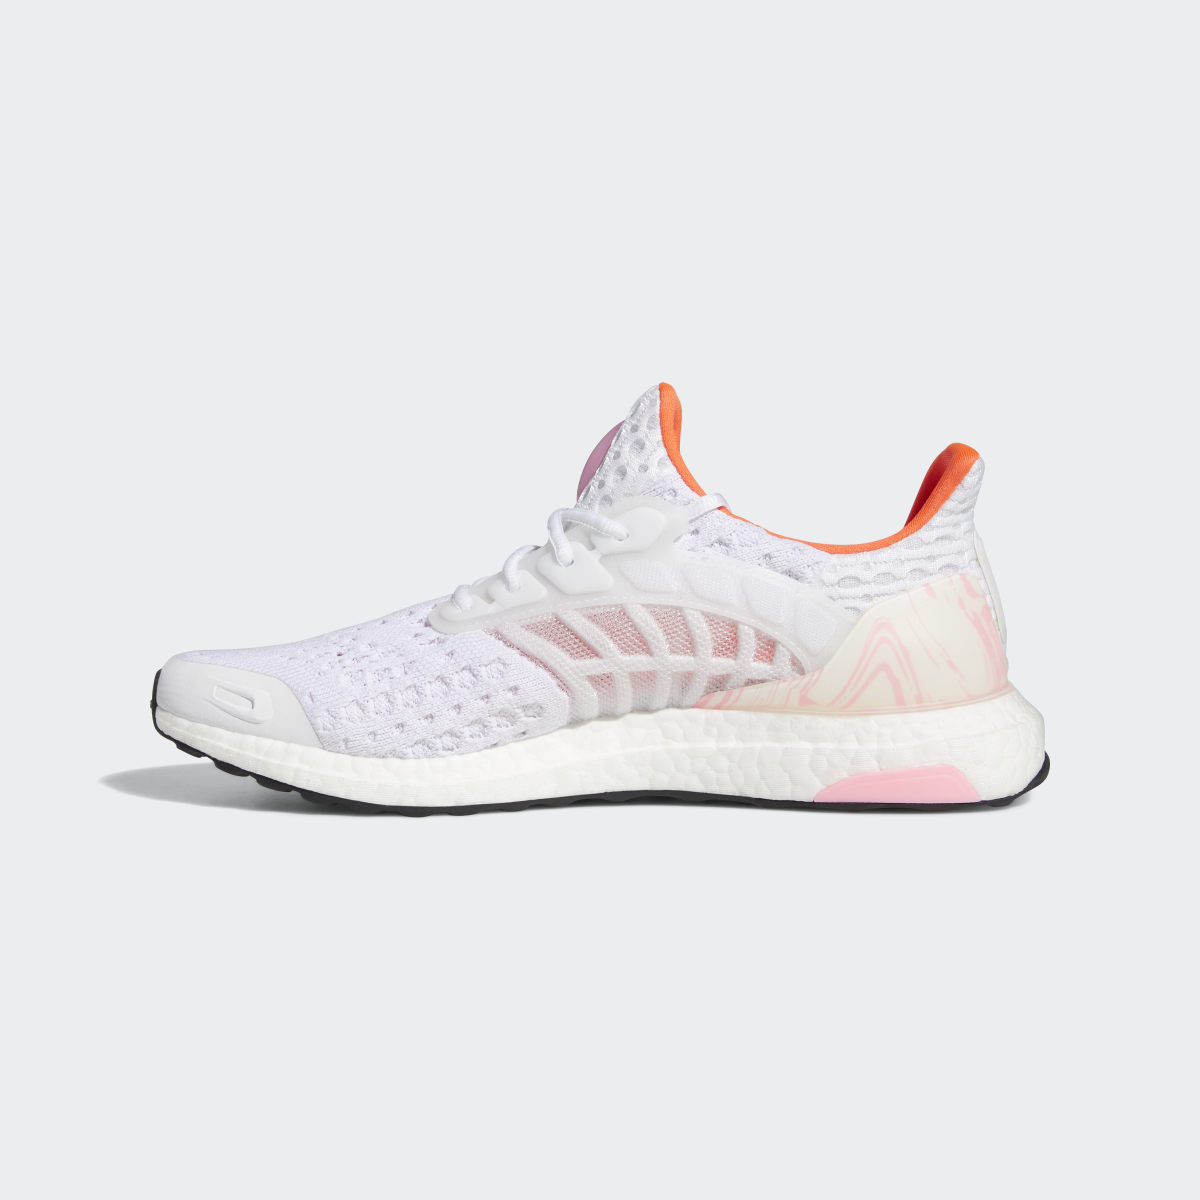 Adidas Ultraboost CC_2 DNA Climacool Running Sportswear Lifestyle Shoes. 10